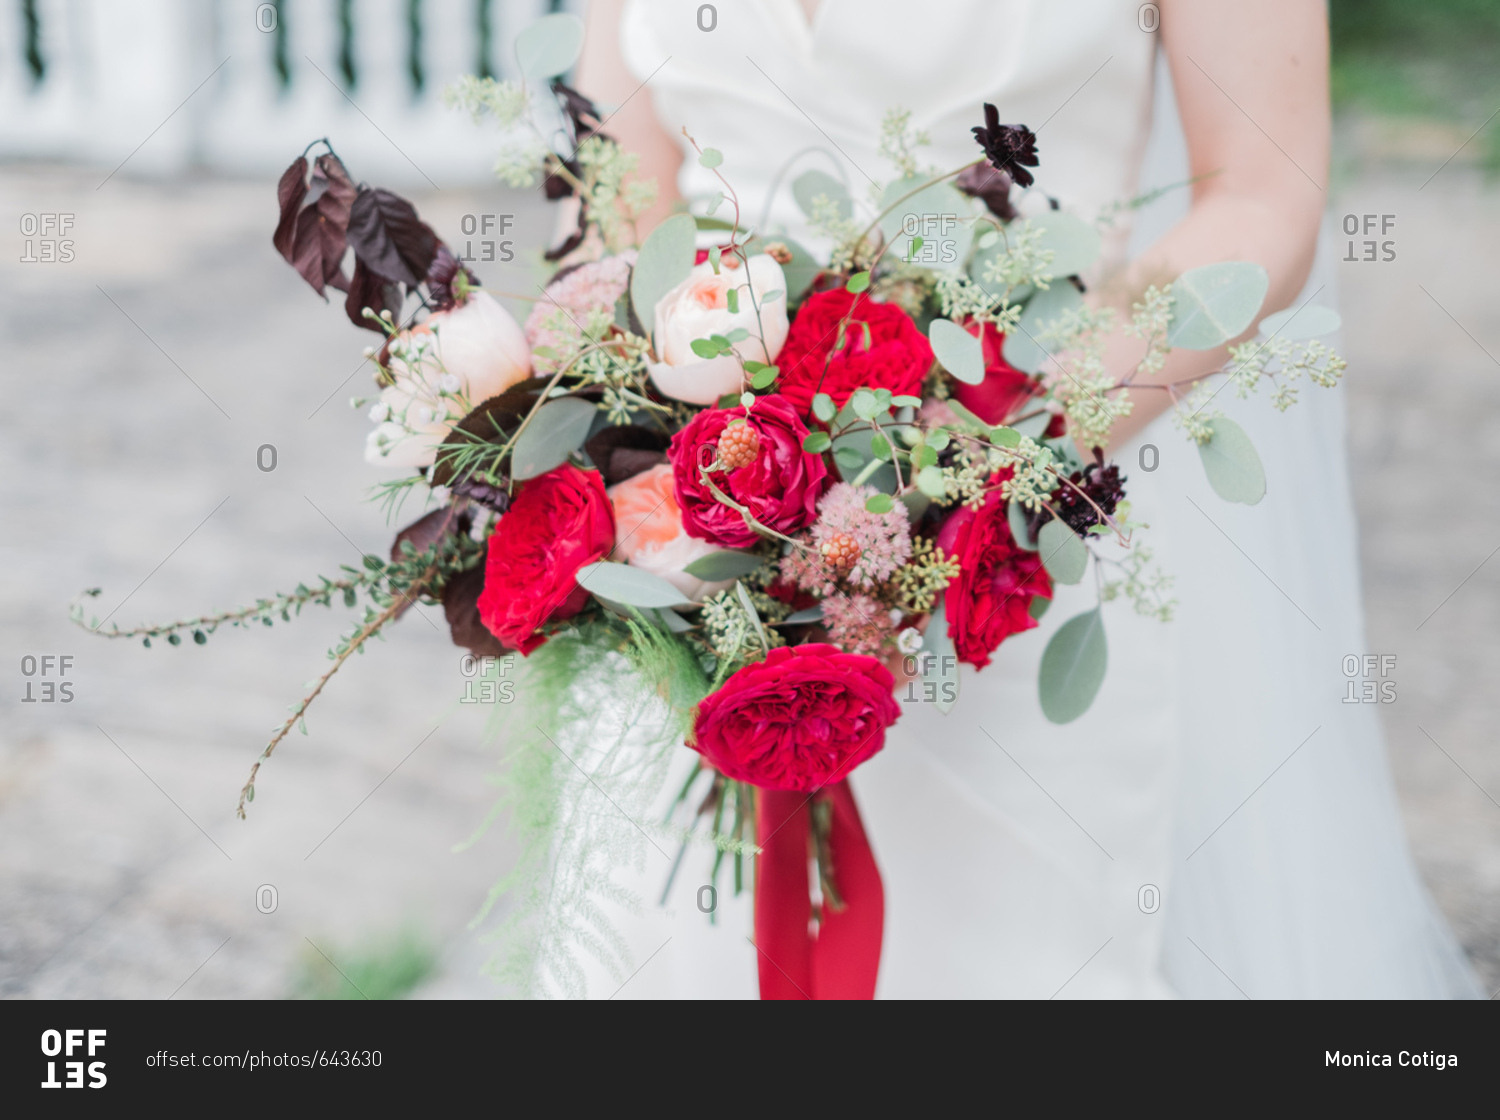 Close-up of bride holding wedding bouquet with red flowers